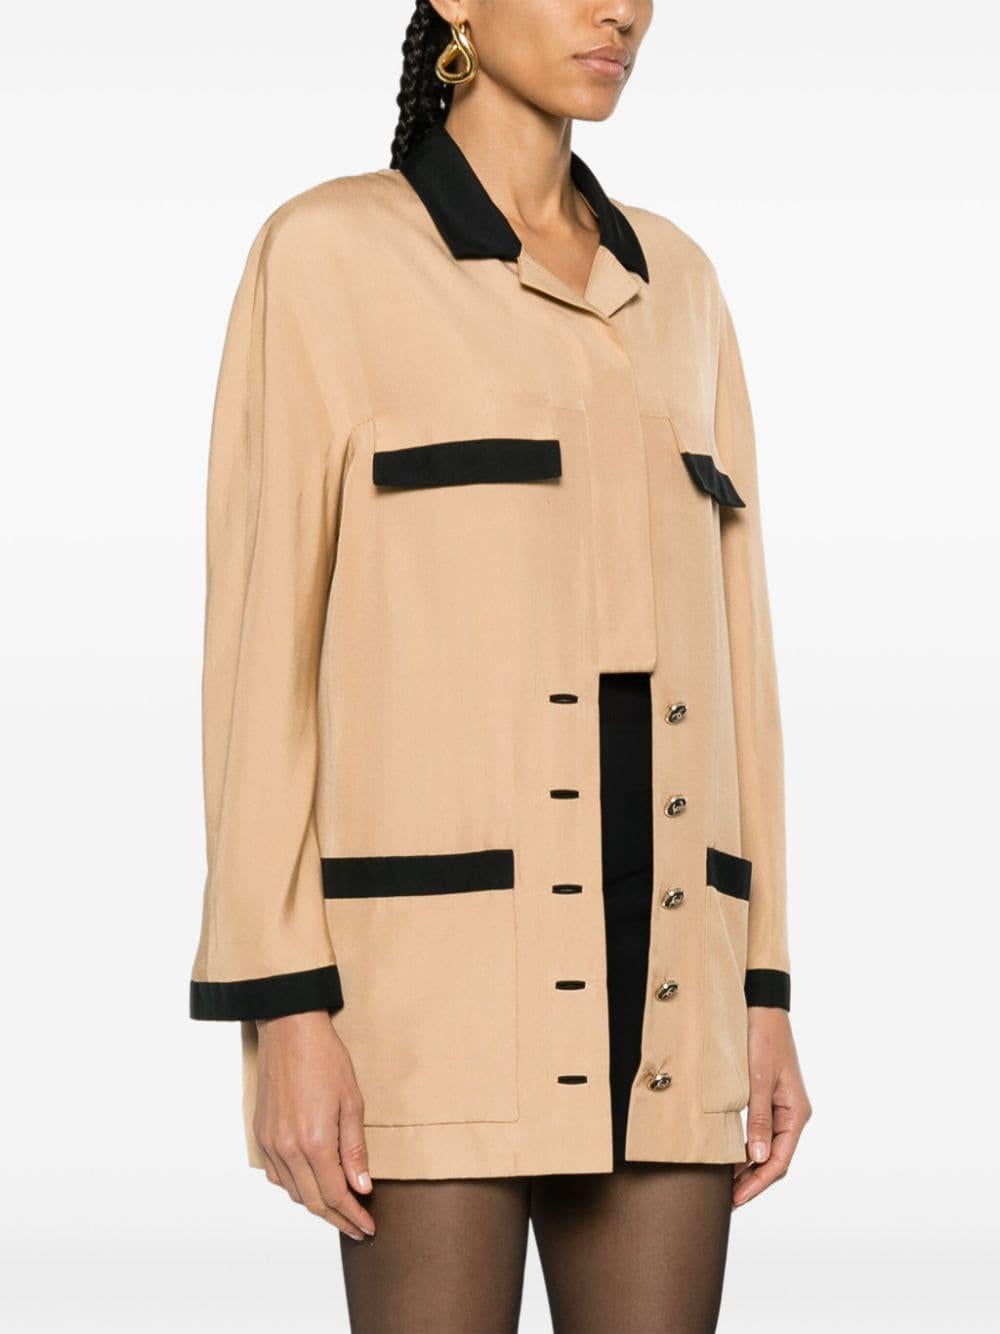 Chanel camel and black contrasting silk shirt jacket featuring contrasting trim, cuban collar, front button fastening, chest flap pockets, two front patch pockets, long sleeves and straight hem.
Composition: Silk 100%
Circa 1990s
Estimated size